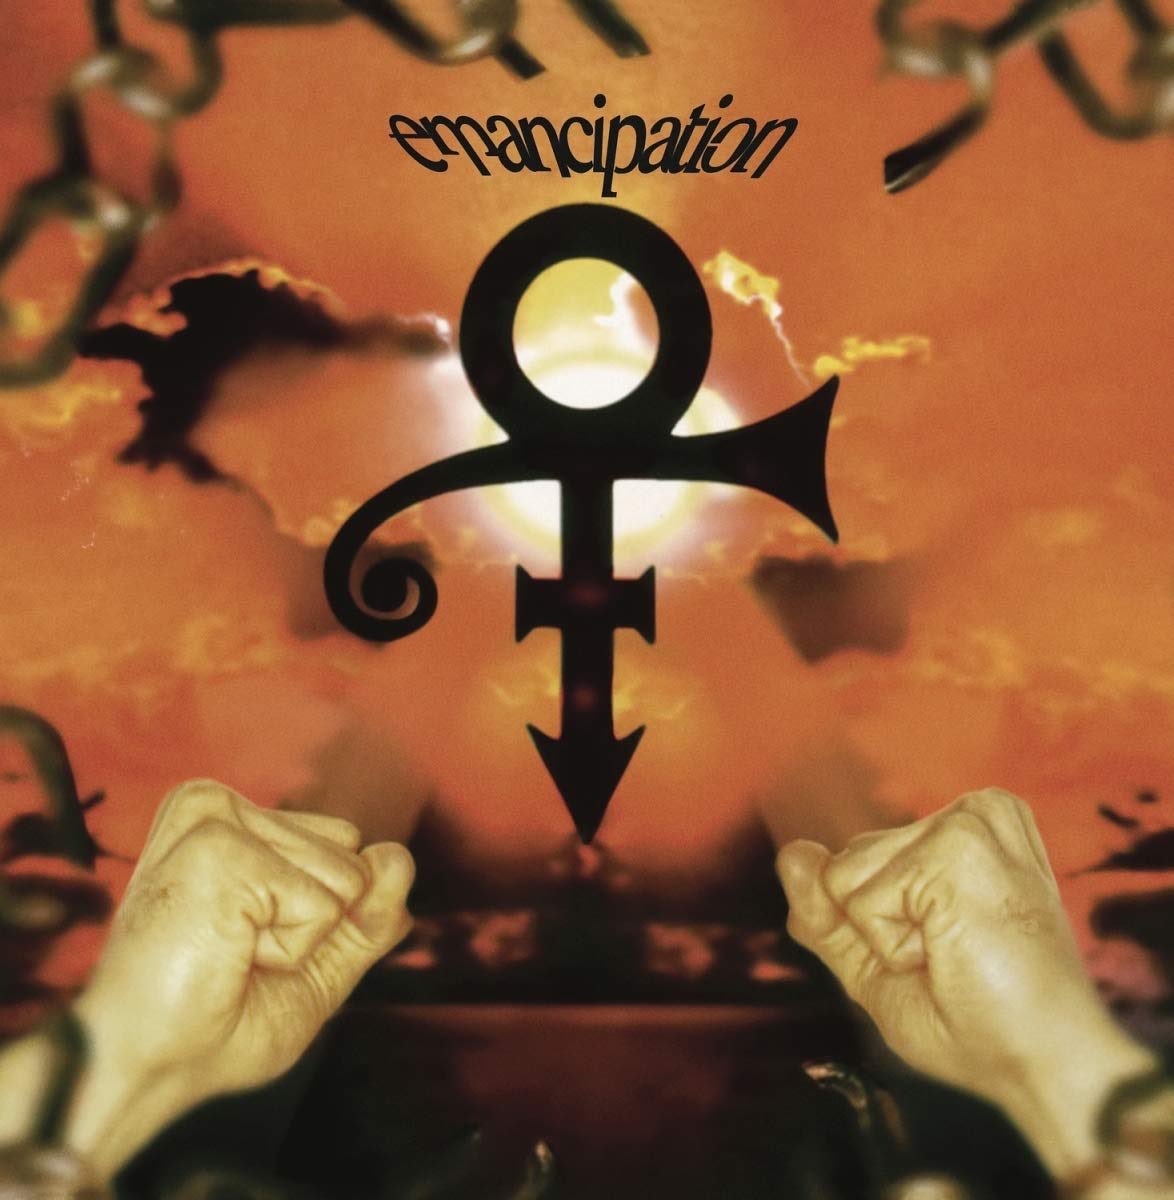 Prince released ‘Chaos and Disorder’, the sixth contractual record in 96. It was…not great! 4 months later he released 'Emancipation' under his own label. It ruled! Prince was ‘free’. So, why didn't he go back to using his name? Because Warner Bros still 'owned' it.